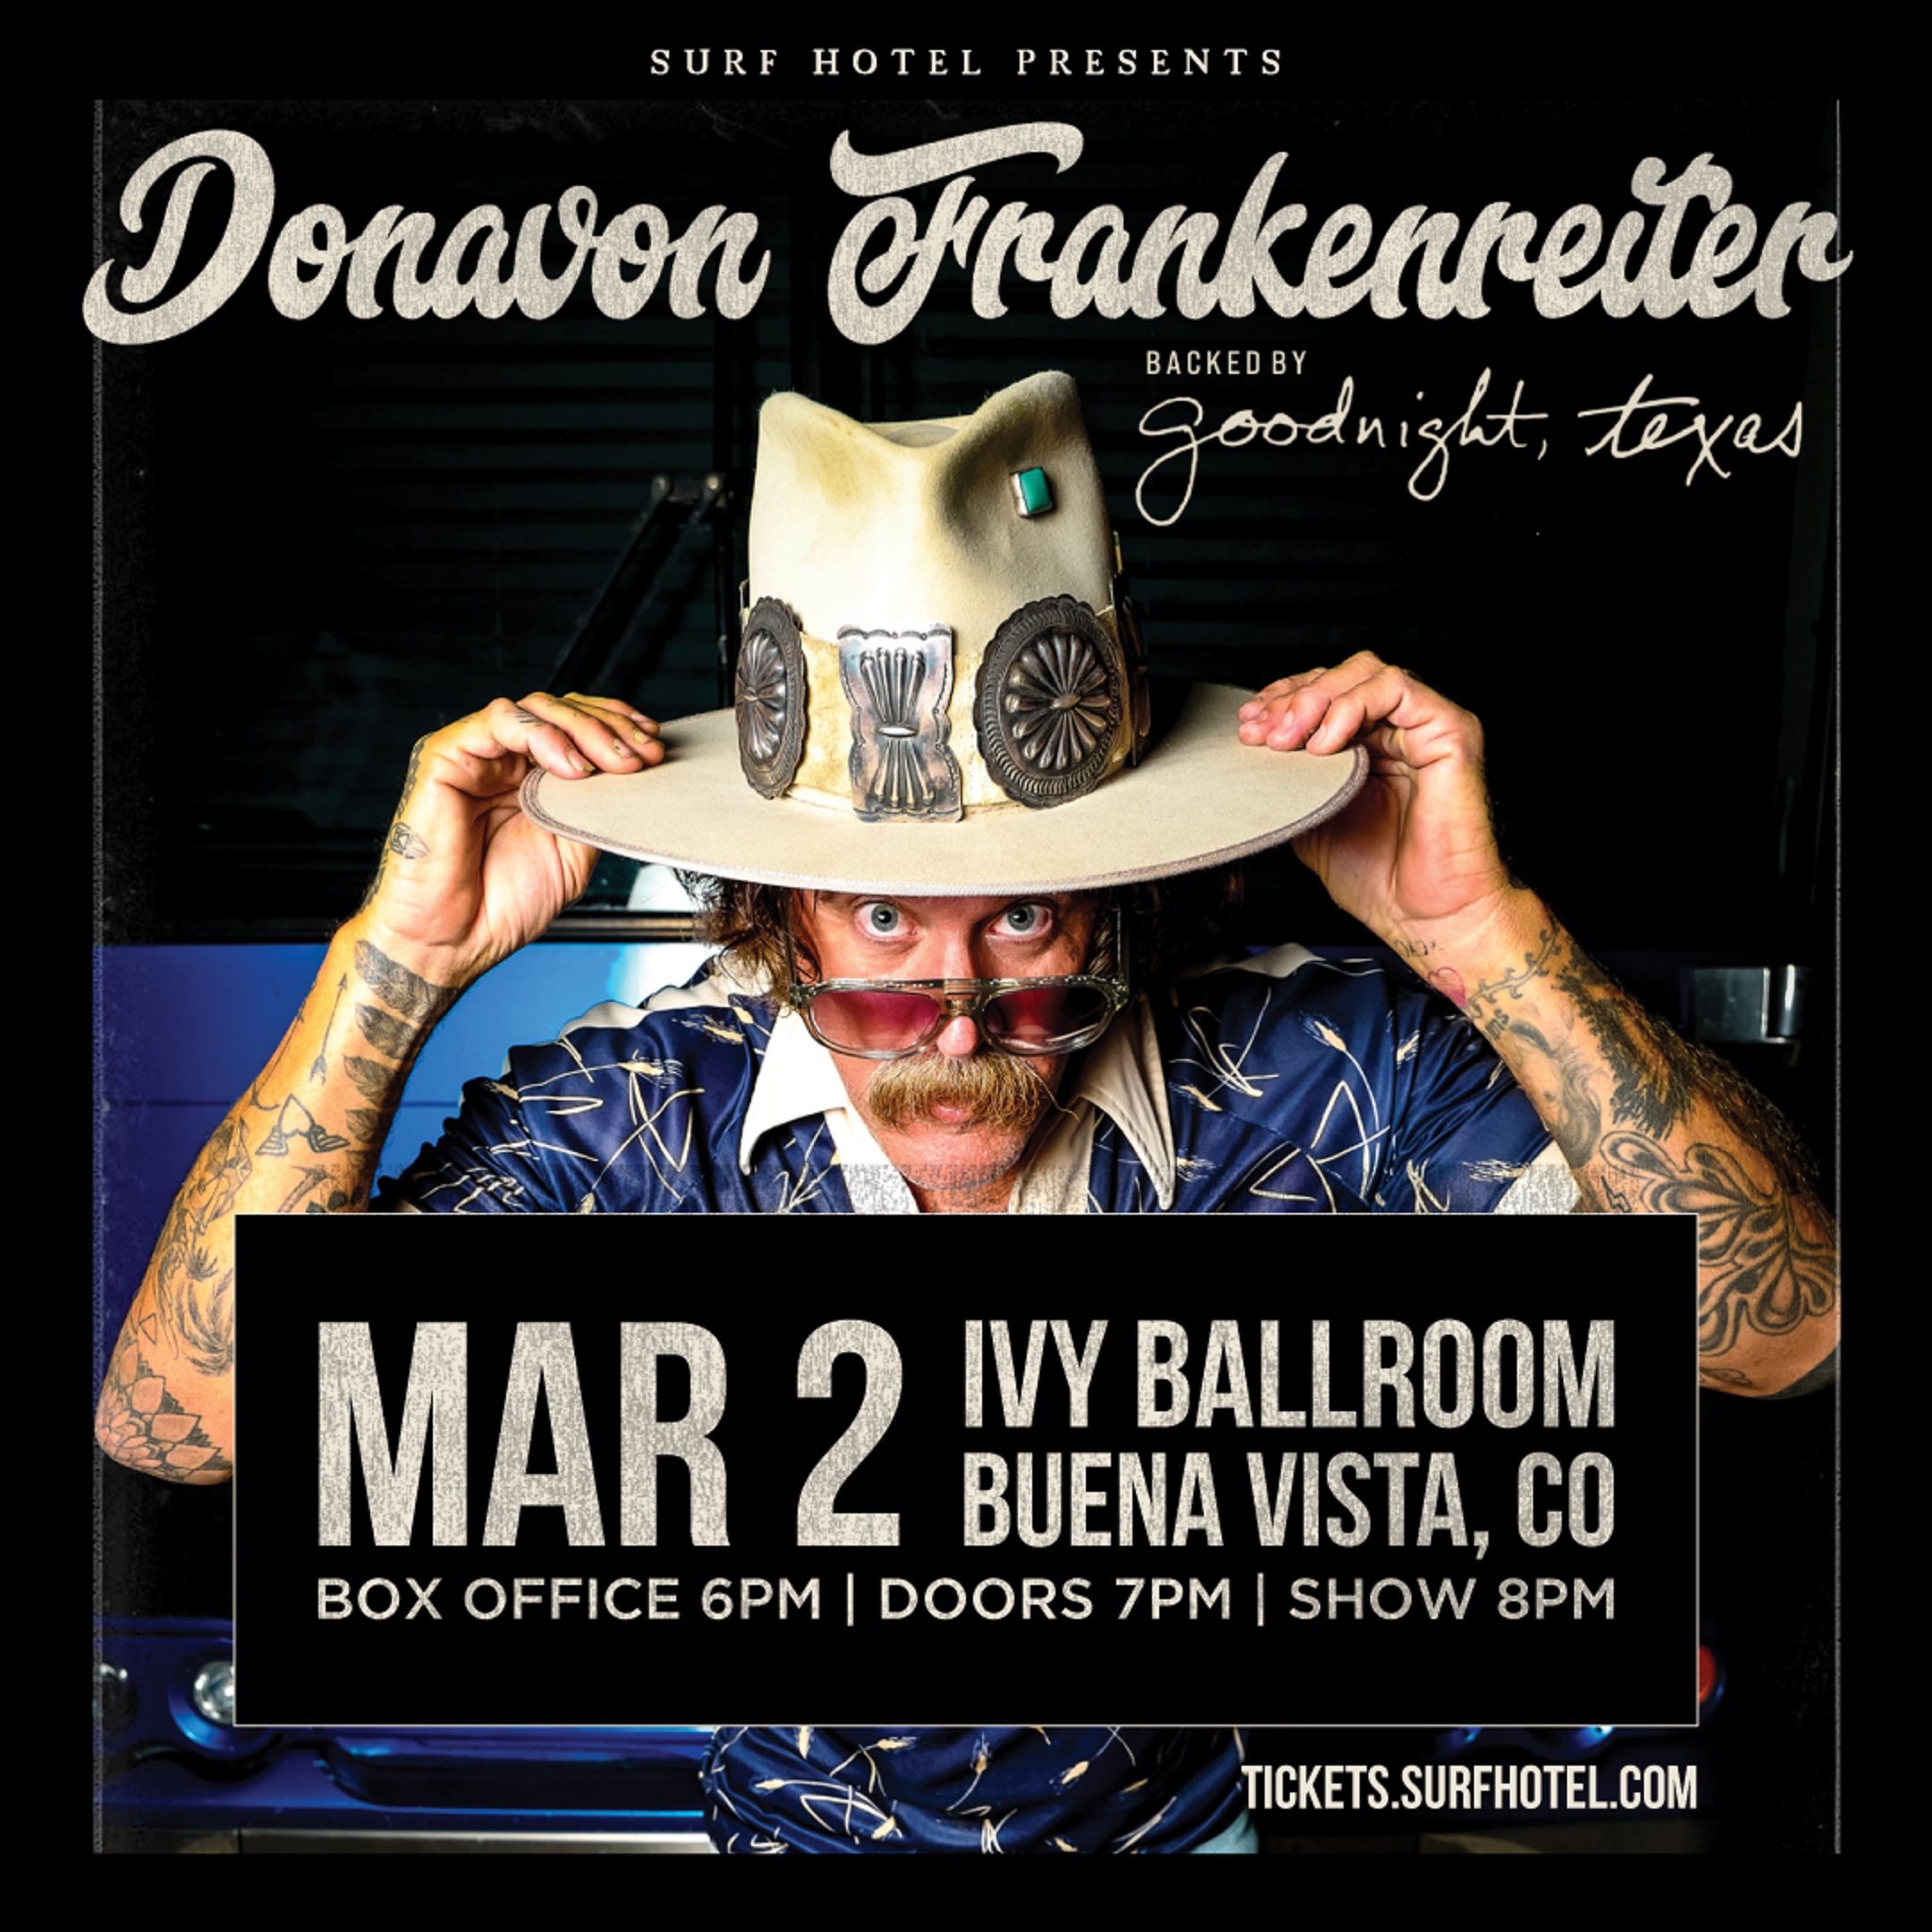 Donavon Frankenreiter Backed by Goodnight, Texas With Madeline Hawthorne Will Perform in the Ivy Ballroom at Surf Hotel